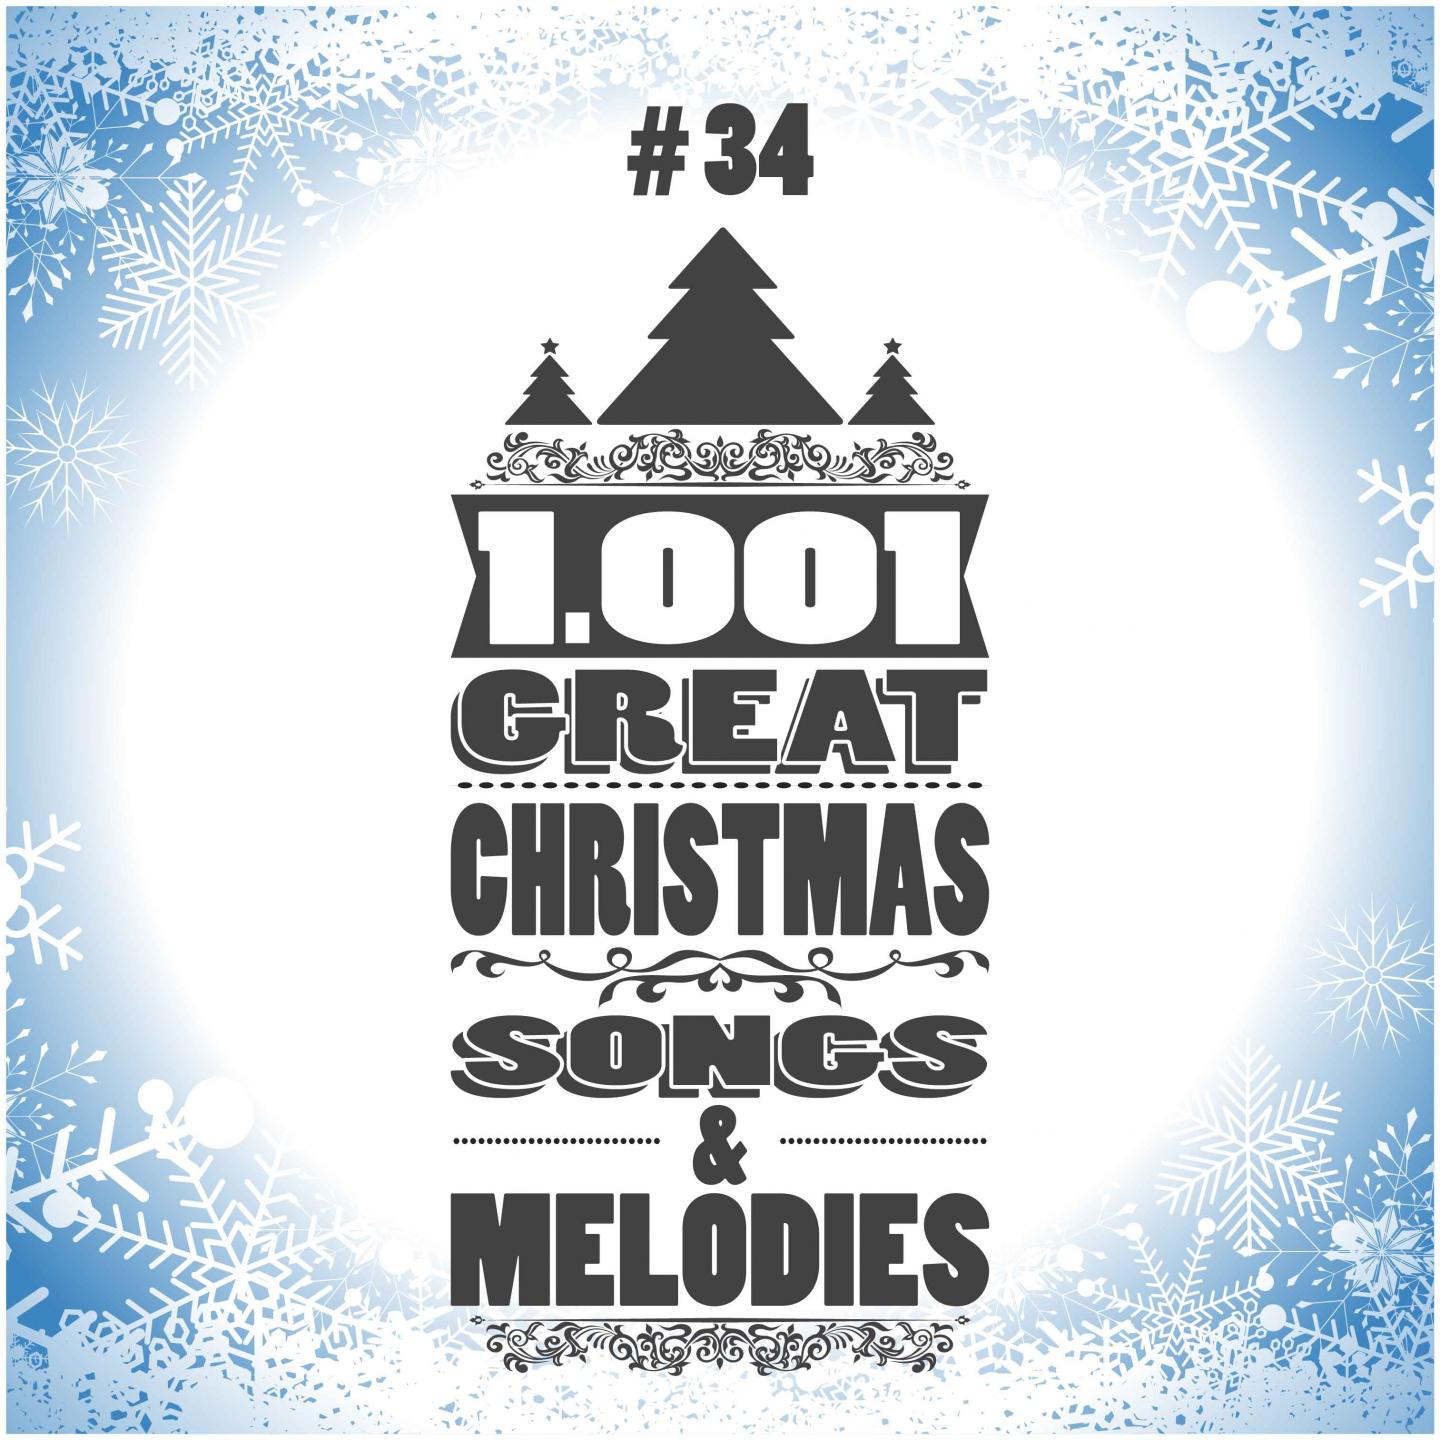 1001 Great Christmas Songs & Melodies, Vol. 34